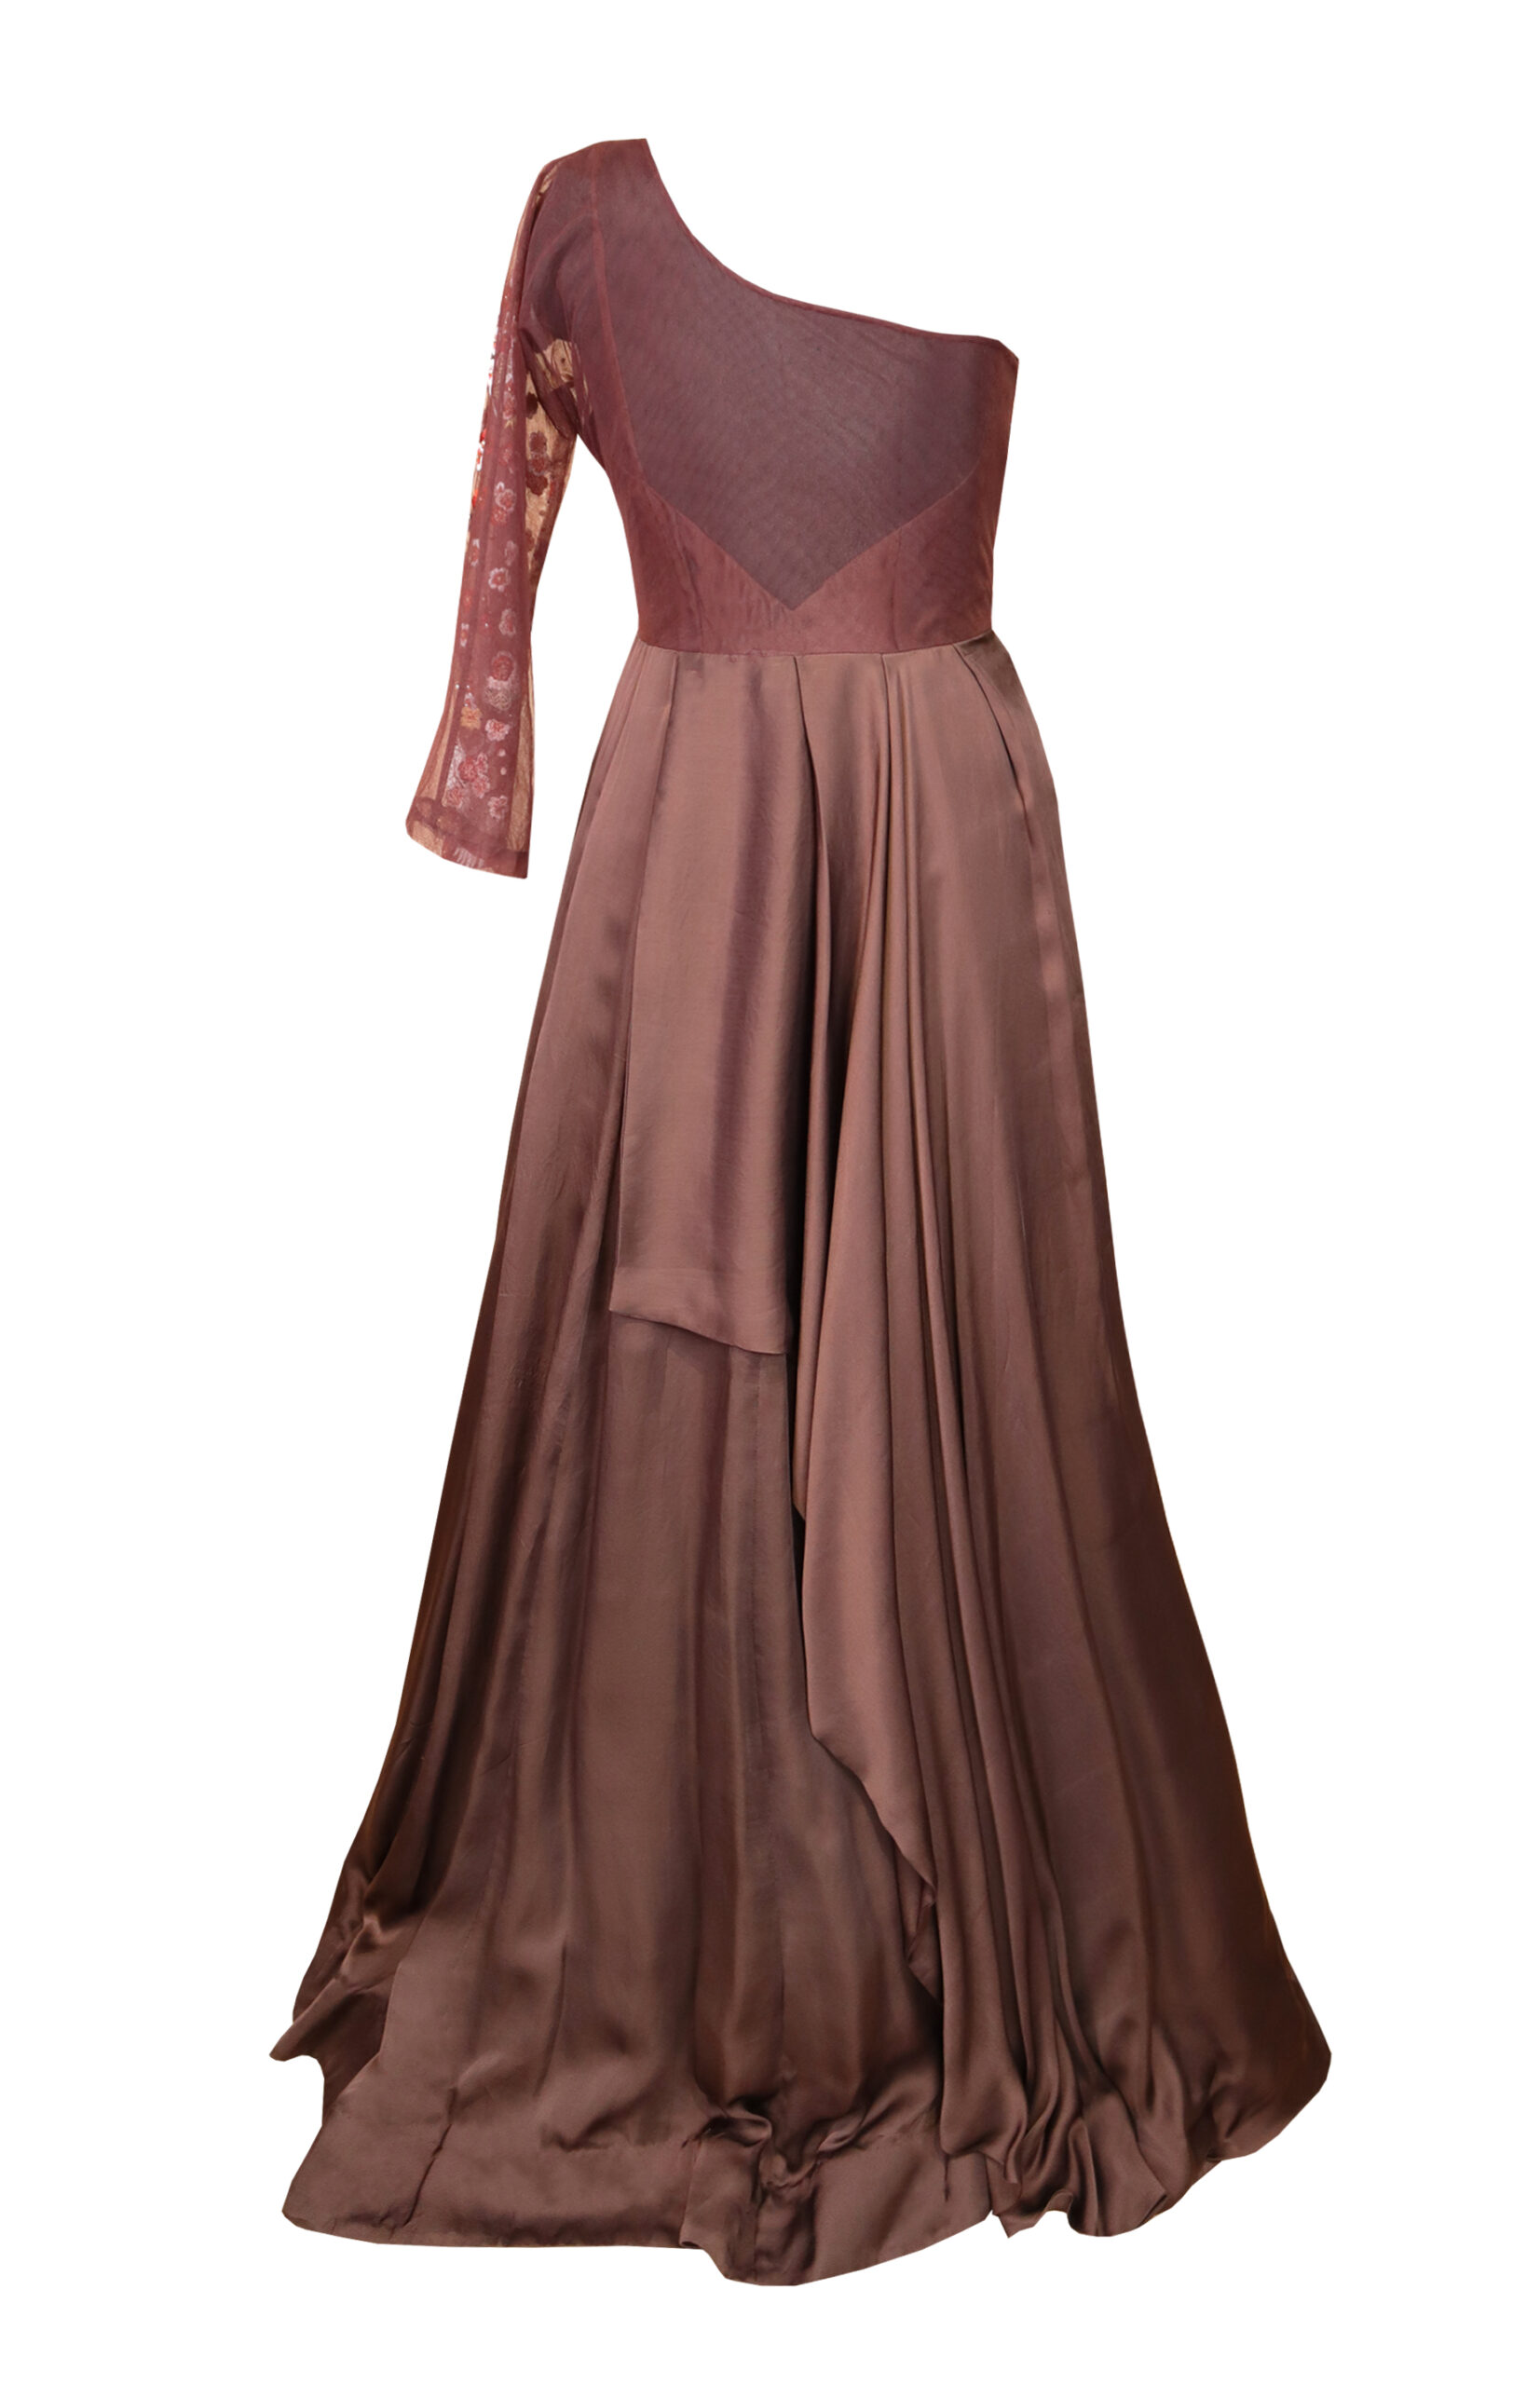 Long brown strapless sweetheart bridesmaid gown.